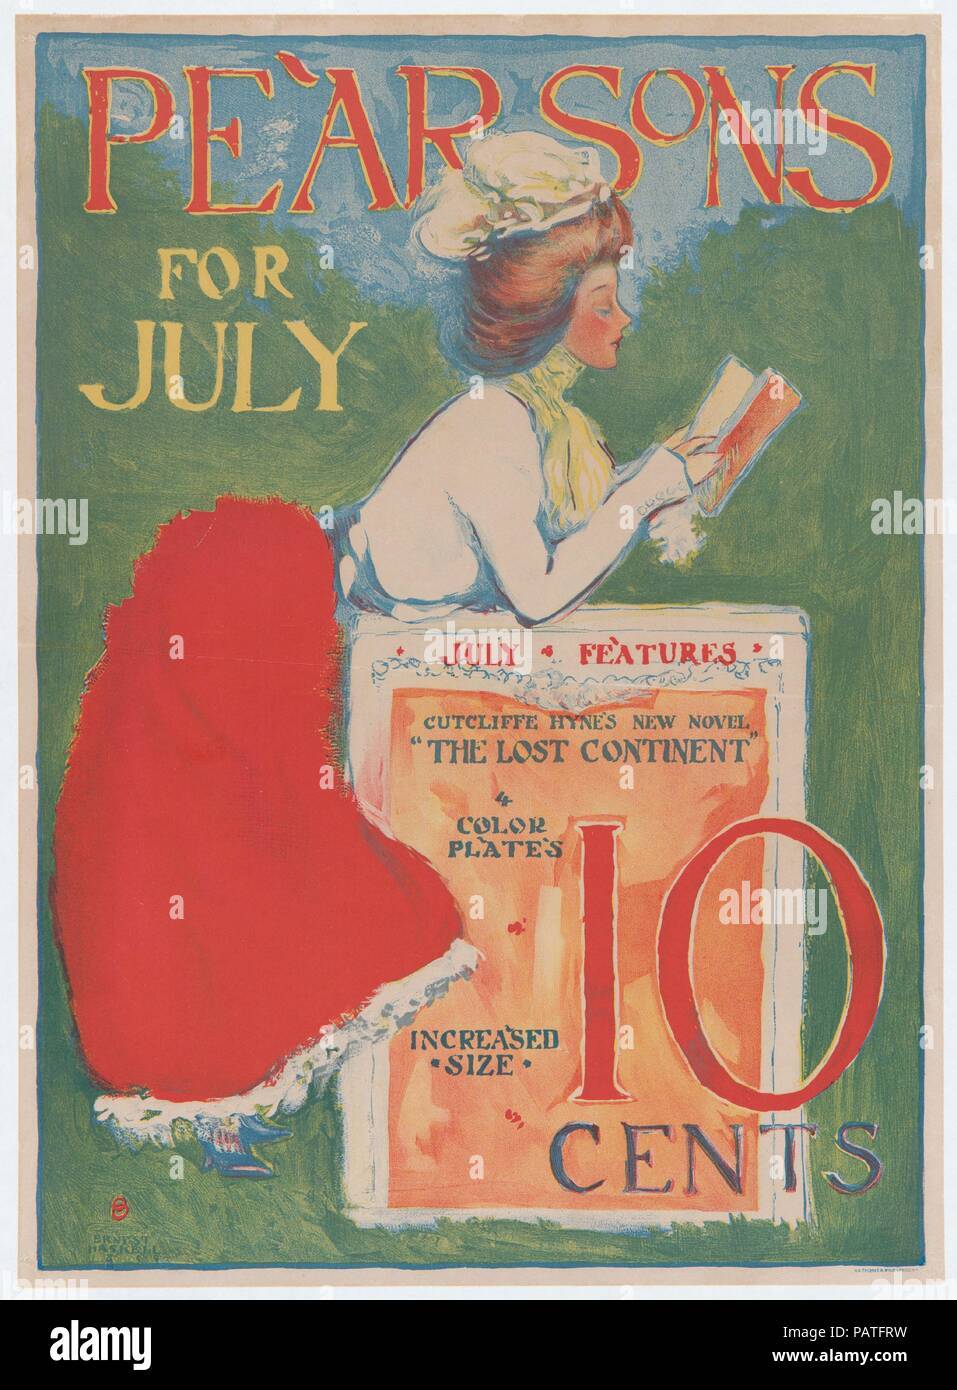 Pearsons for July. Artist: Ernest Haskell (American, Woodstock, Connecticut 1876-1925 West Point, Maine). Dimensions: Sheet: 19 5/16 × 14 1/16 in. (49 × 35.7 cm). Printer: H.A. Thomas & Wylie Lithographer Co., New York. Date: 1899. Museum: Metropolitan Museum of Art, New York, USA. Stock Photo